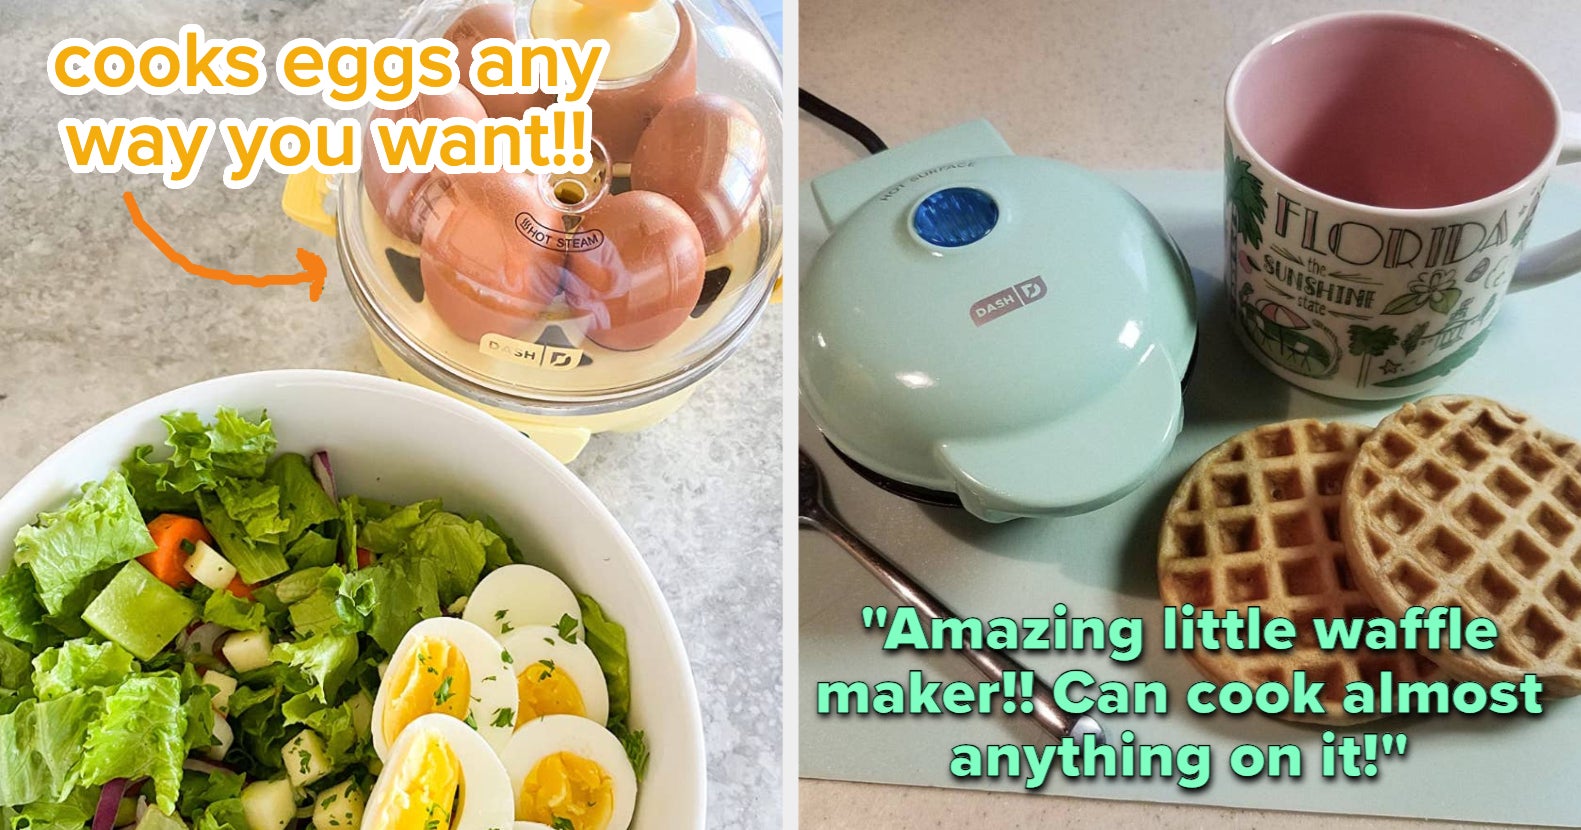 Egg Cocker Baked Potato Microwave Cooker SEEN-ON-TV Tender Fluffy Cooks in  Minutes Steamer, Dishwasher-Safe Kitchen Gadgets, 8 Inches Clear